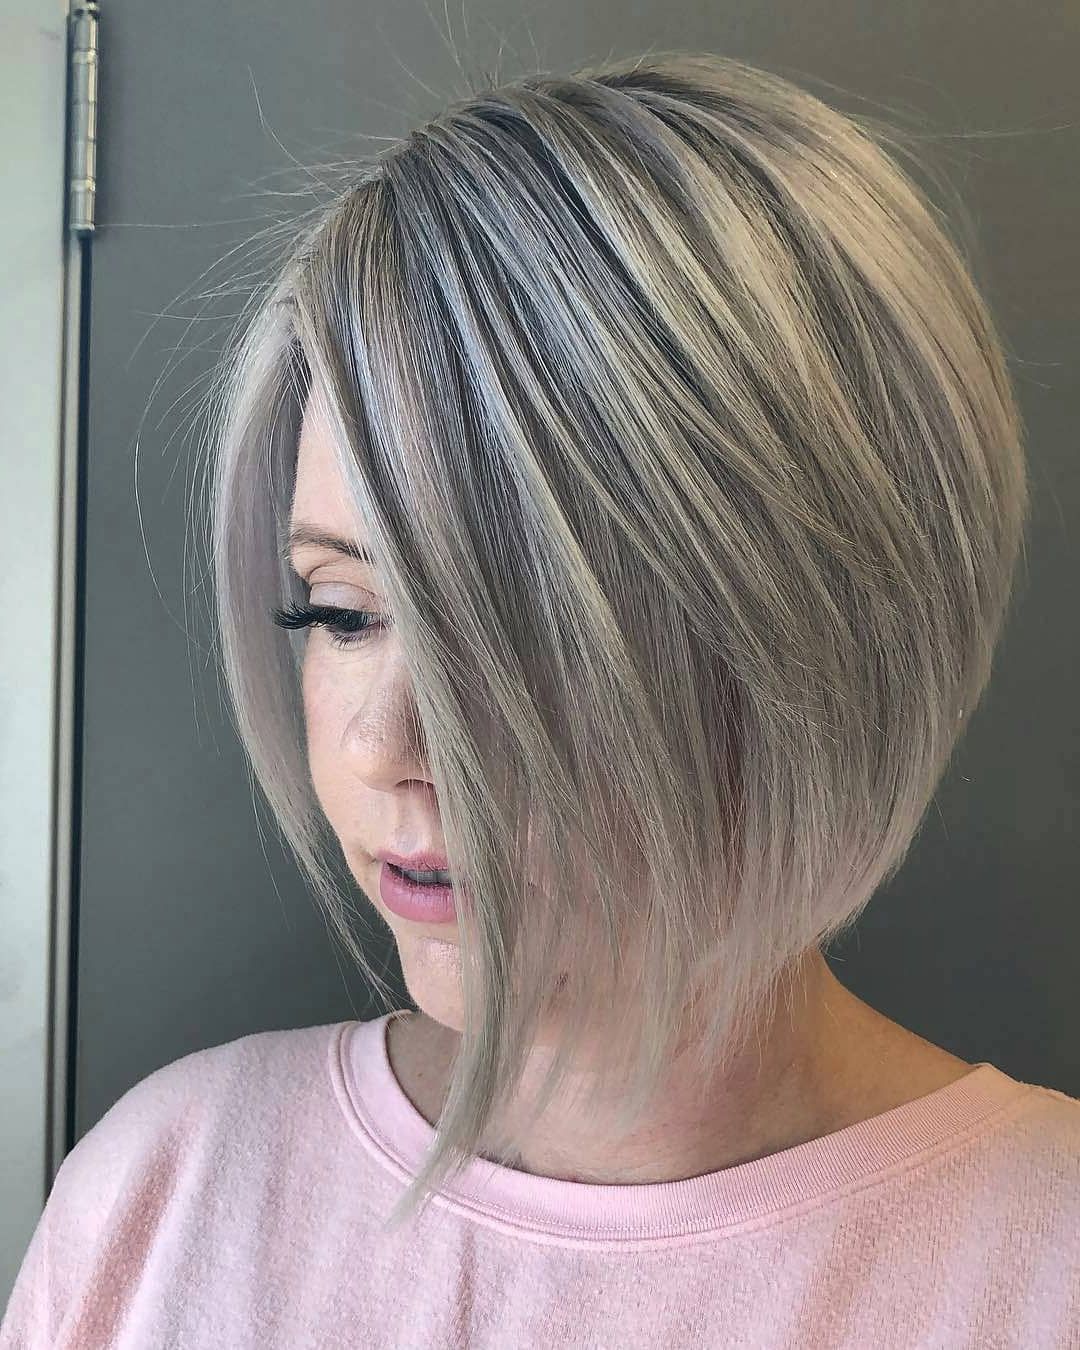 10 Simple Short Straight Bob Haircuts, Women Short Hairstyle Regarding Bob Hairstyles With Contrasting Highlights (View 9 of 20)